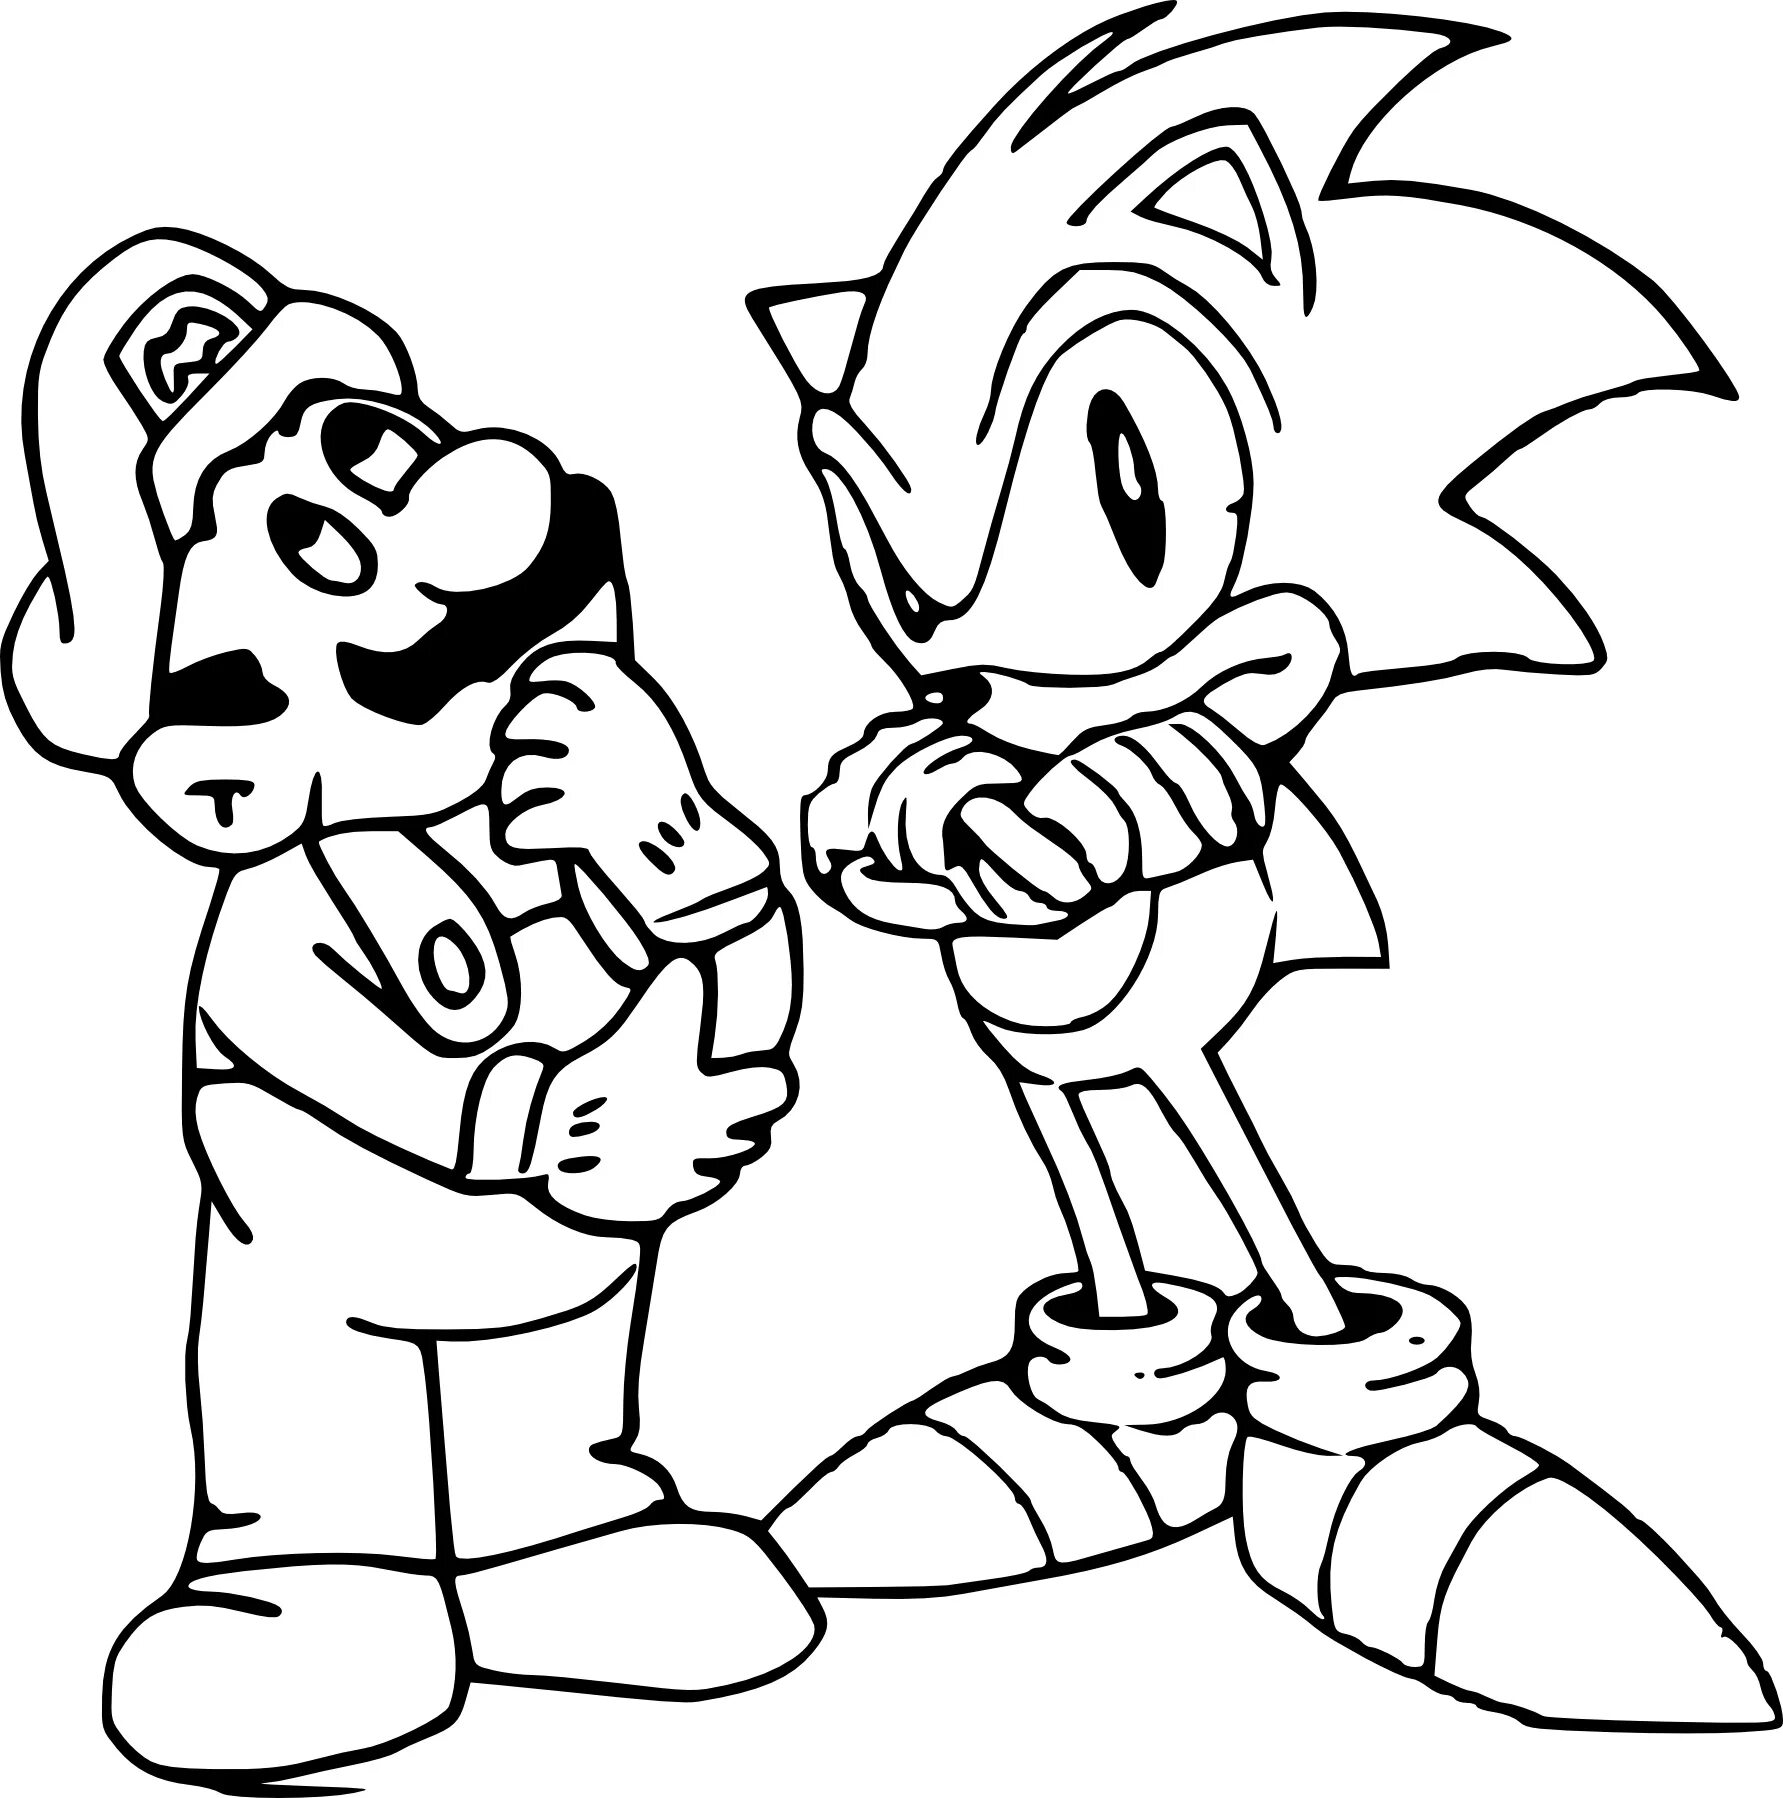 Creative mario and sonic coloring book